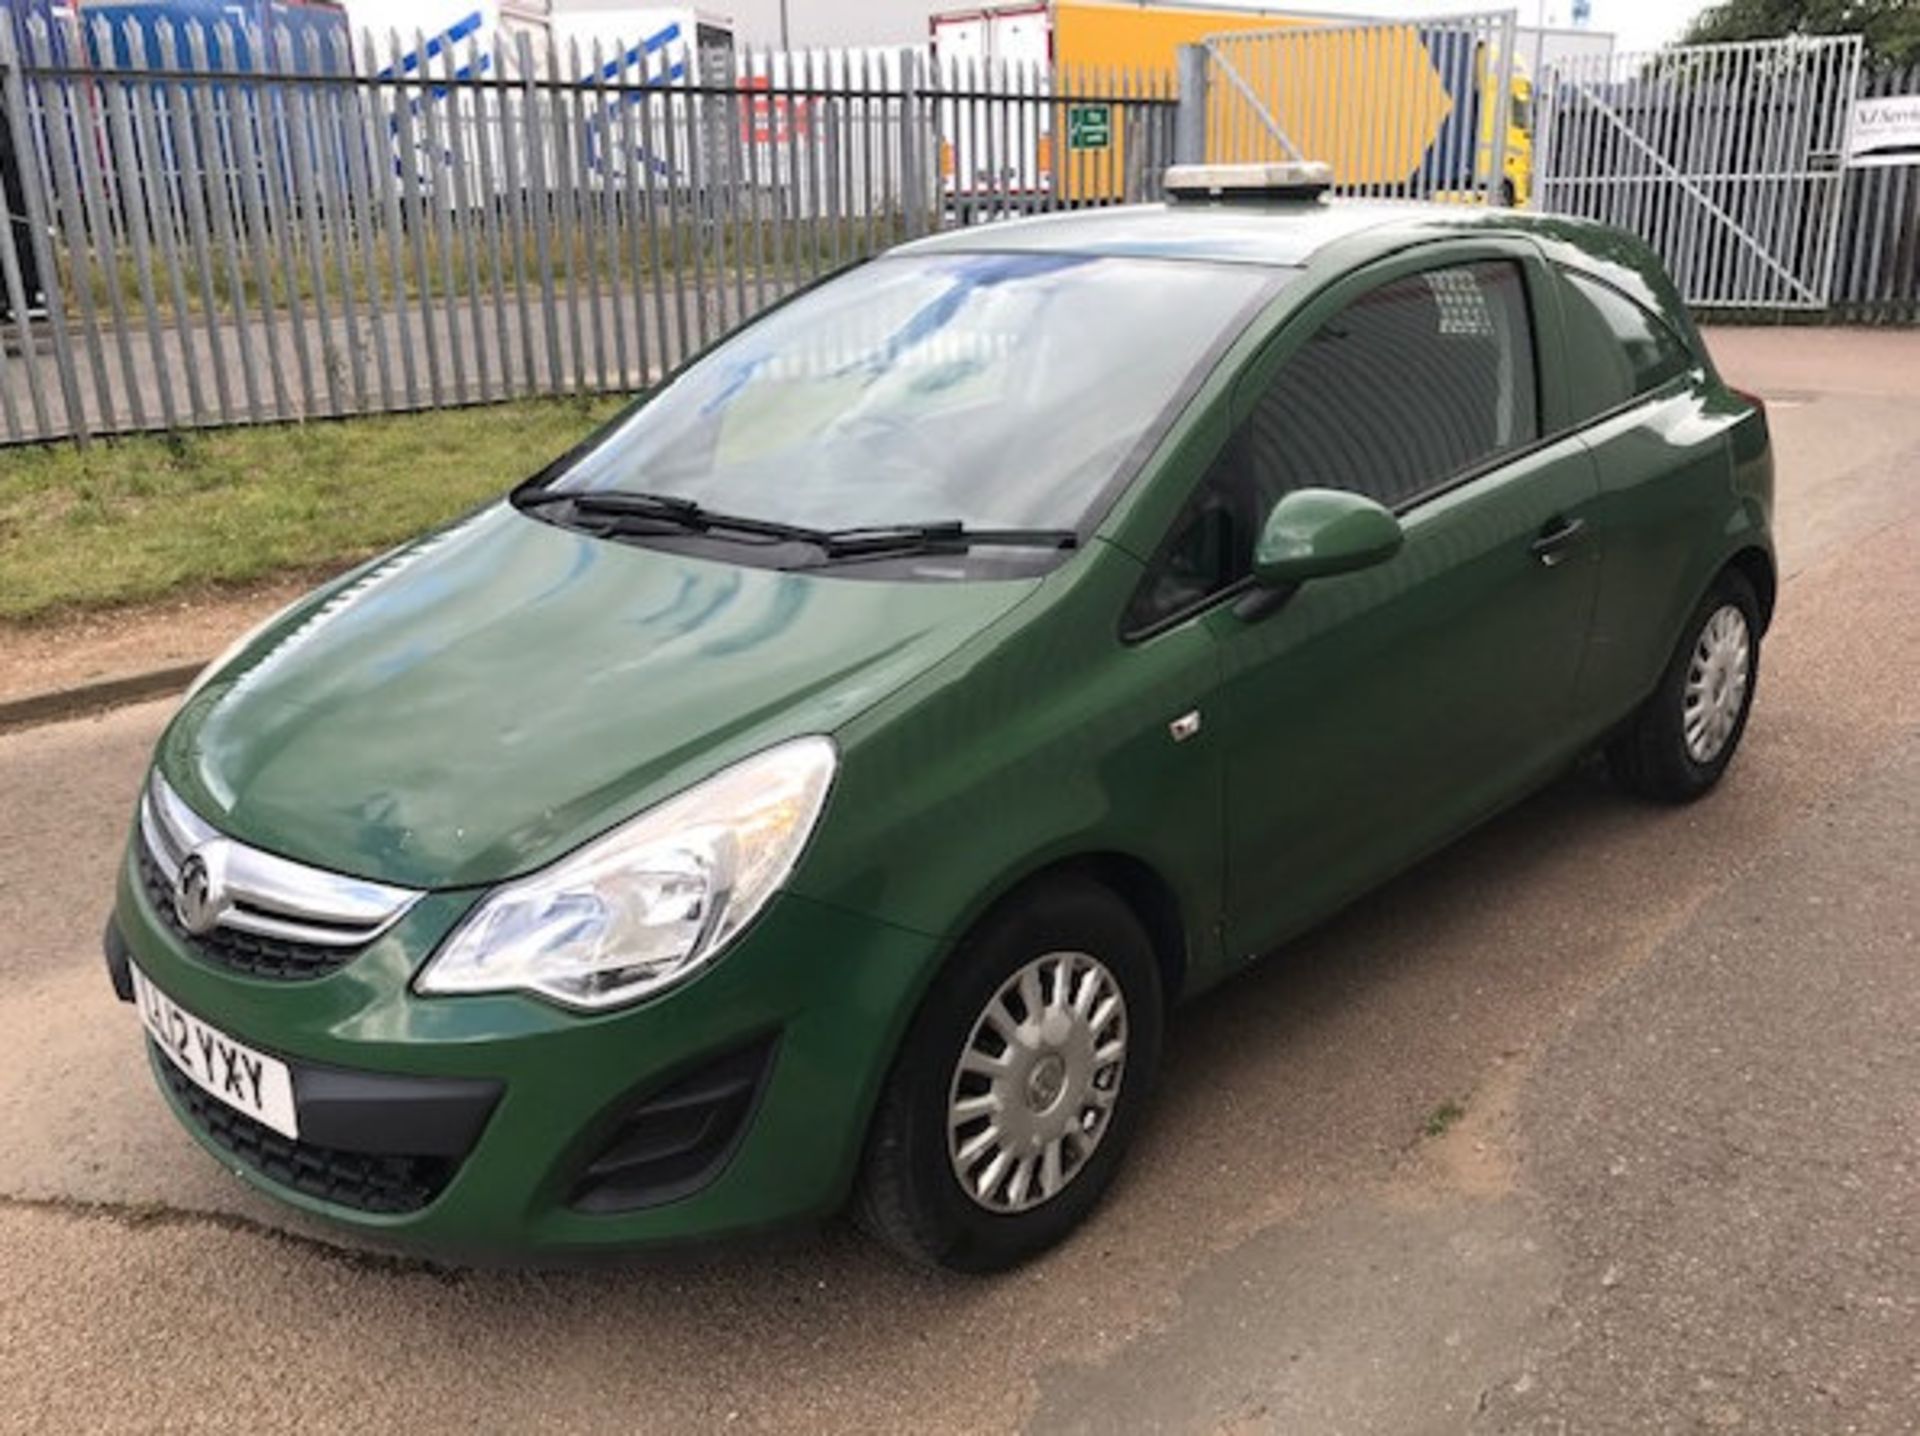 2012 Vauxhall Corsa 1.3 CDTI 3 Dr Panel Van- CL505 - Location: Corby, Northamptonshire - Image 3 of 11